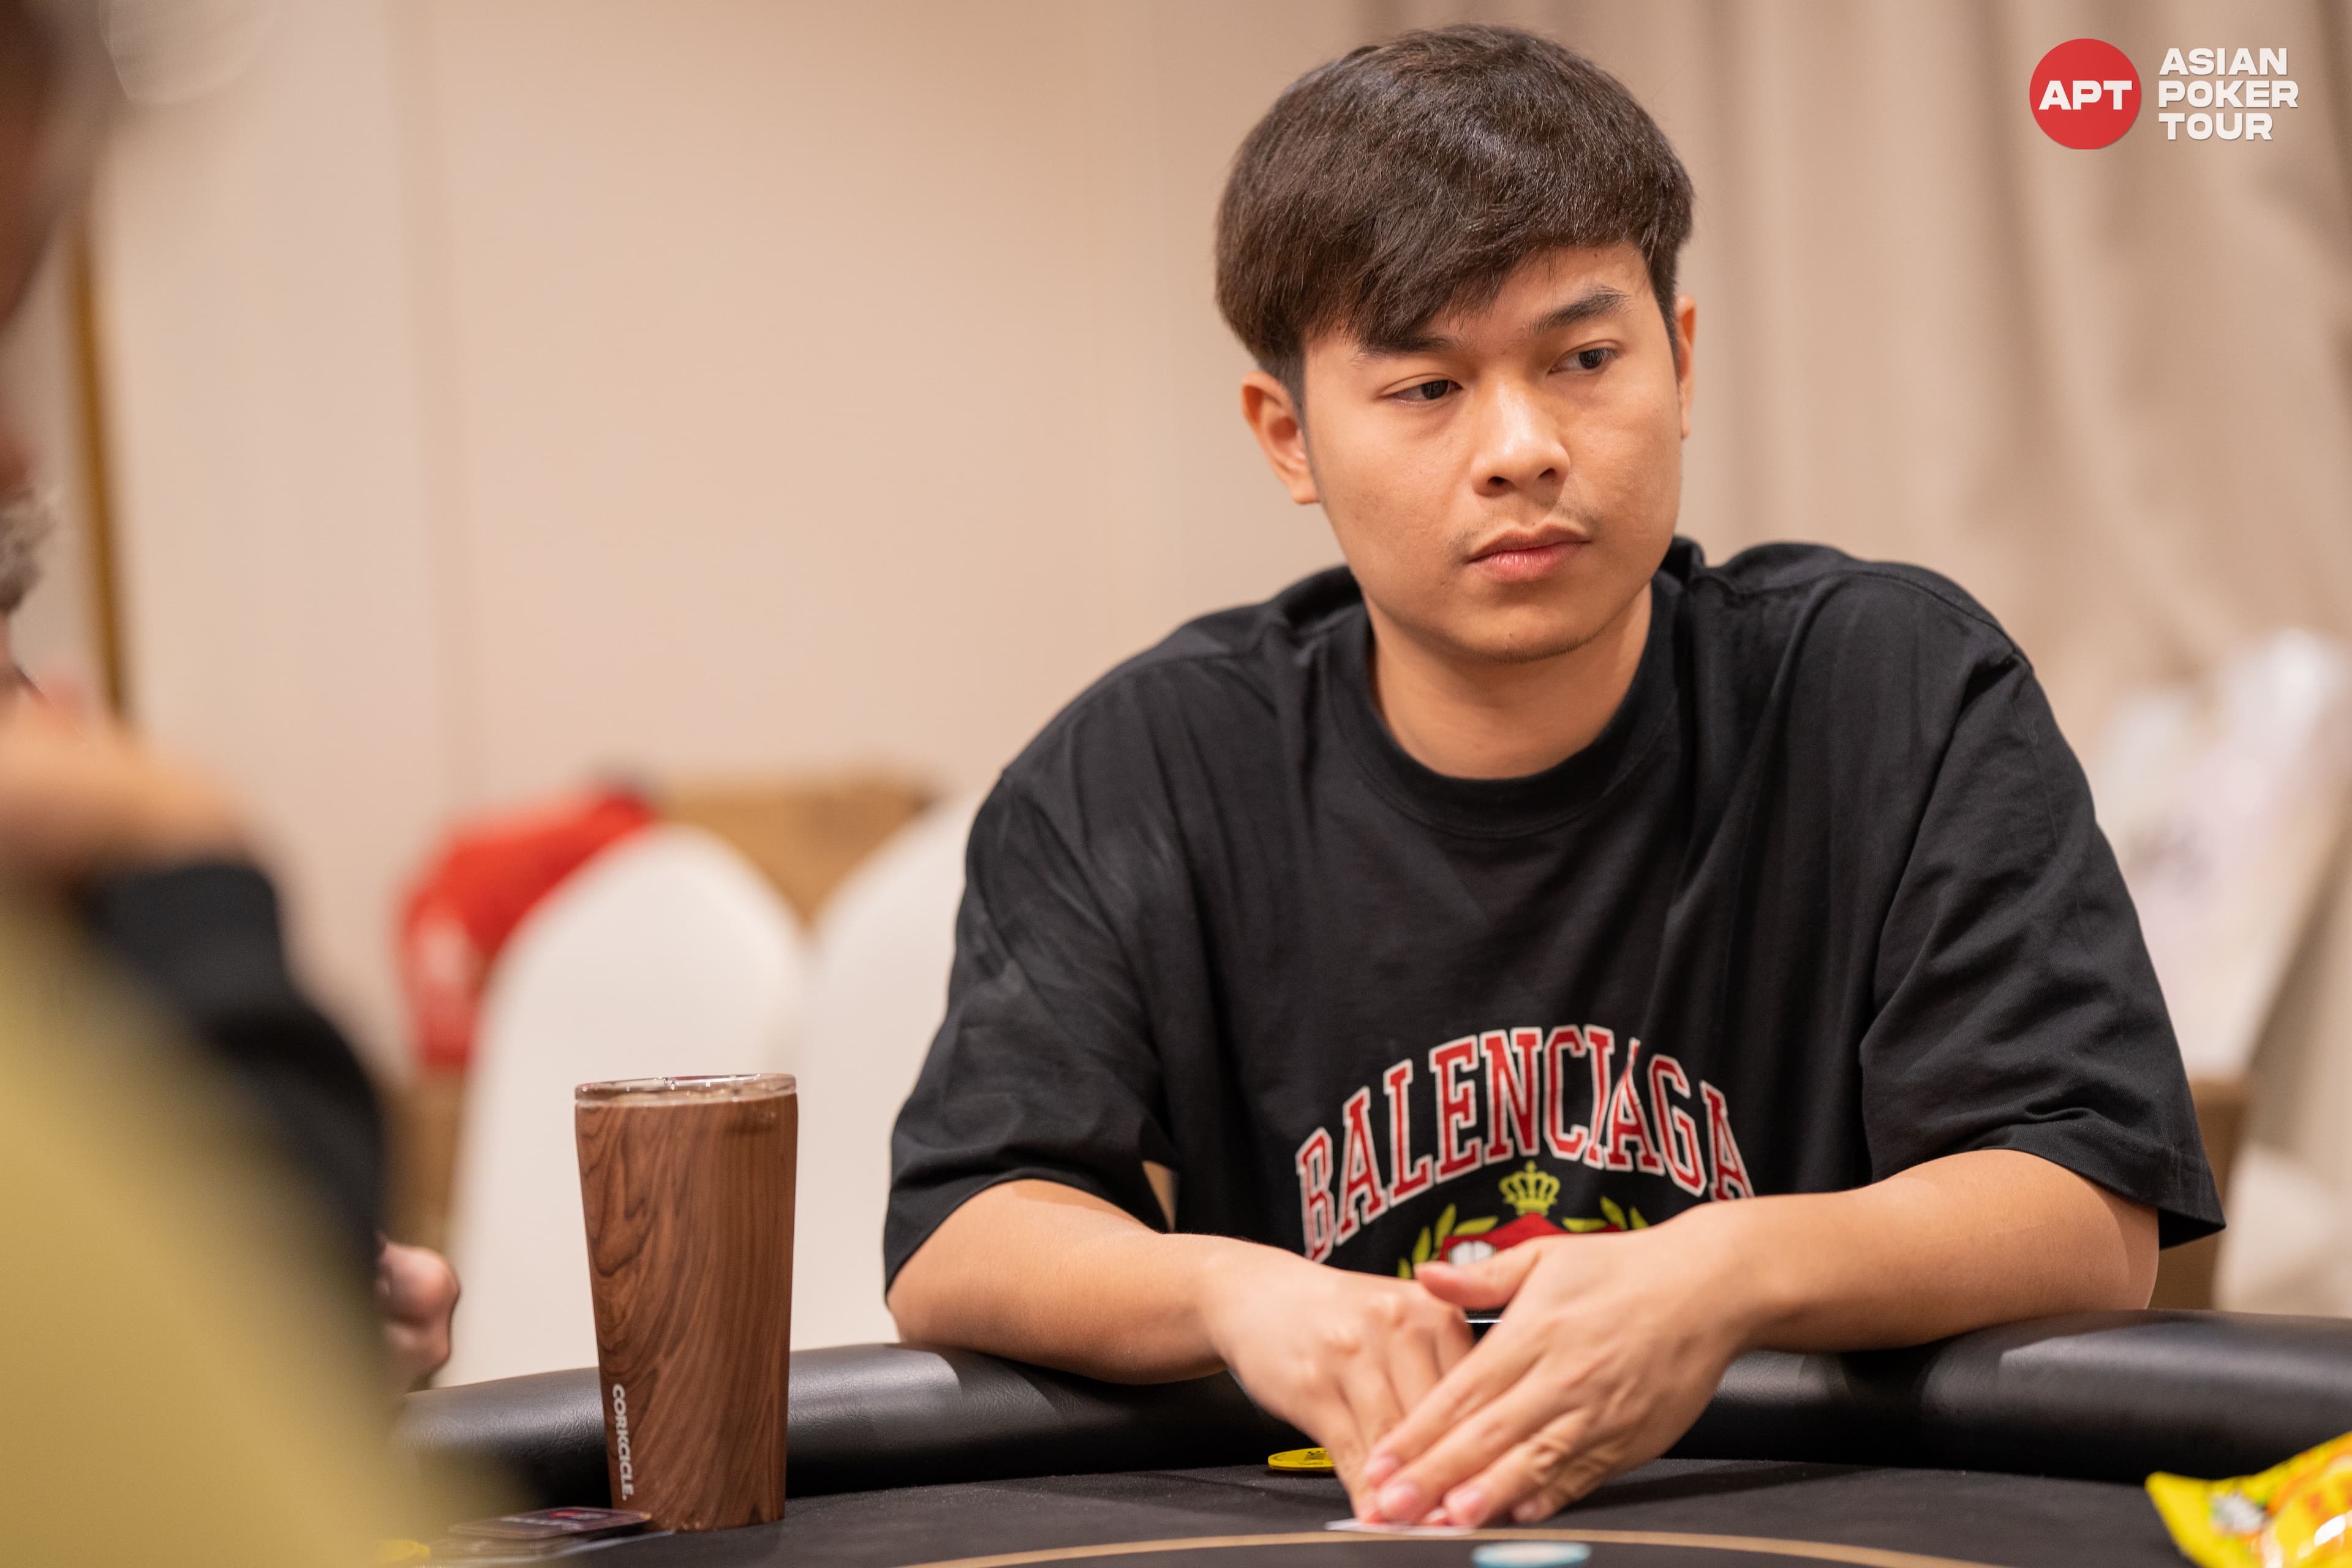 The UK's Jacque Ramsden Wins Main Event For ₫2.304BN (~$99K), APT High Roller Draws 102 Entries Generating ₫4.947 (~$212K) Prize Pool; Russia's Nikolay Ponomarenko Leads